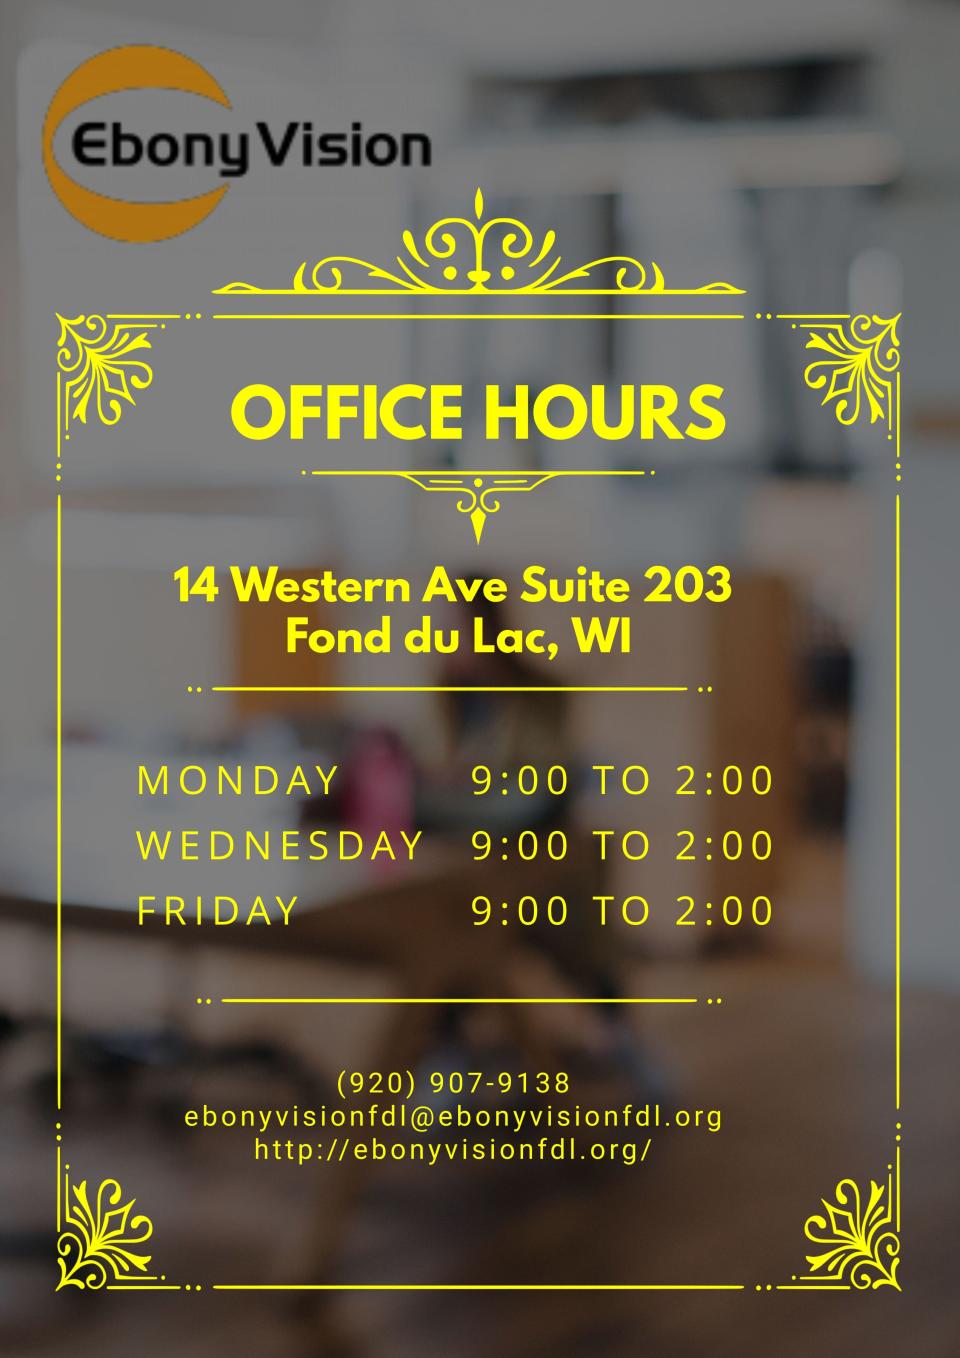 A look at Ebony Vision's office hours in Fond du Lac.